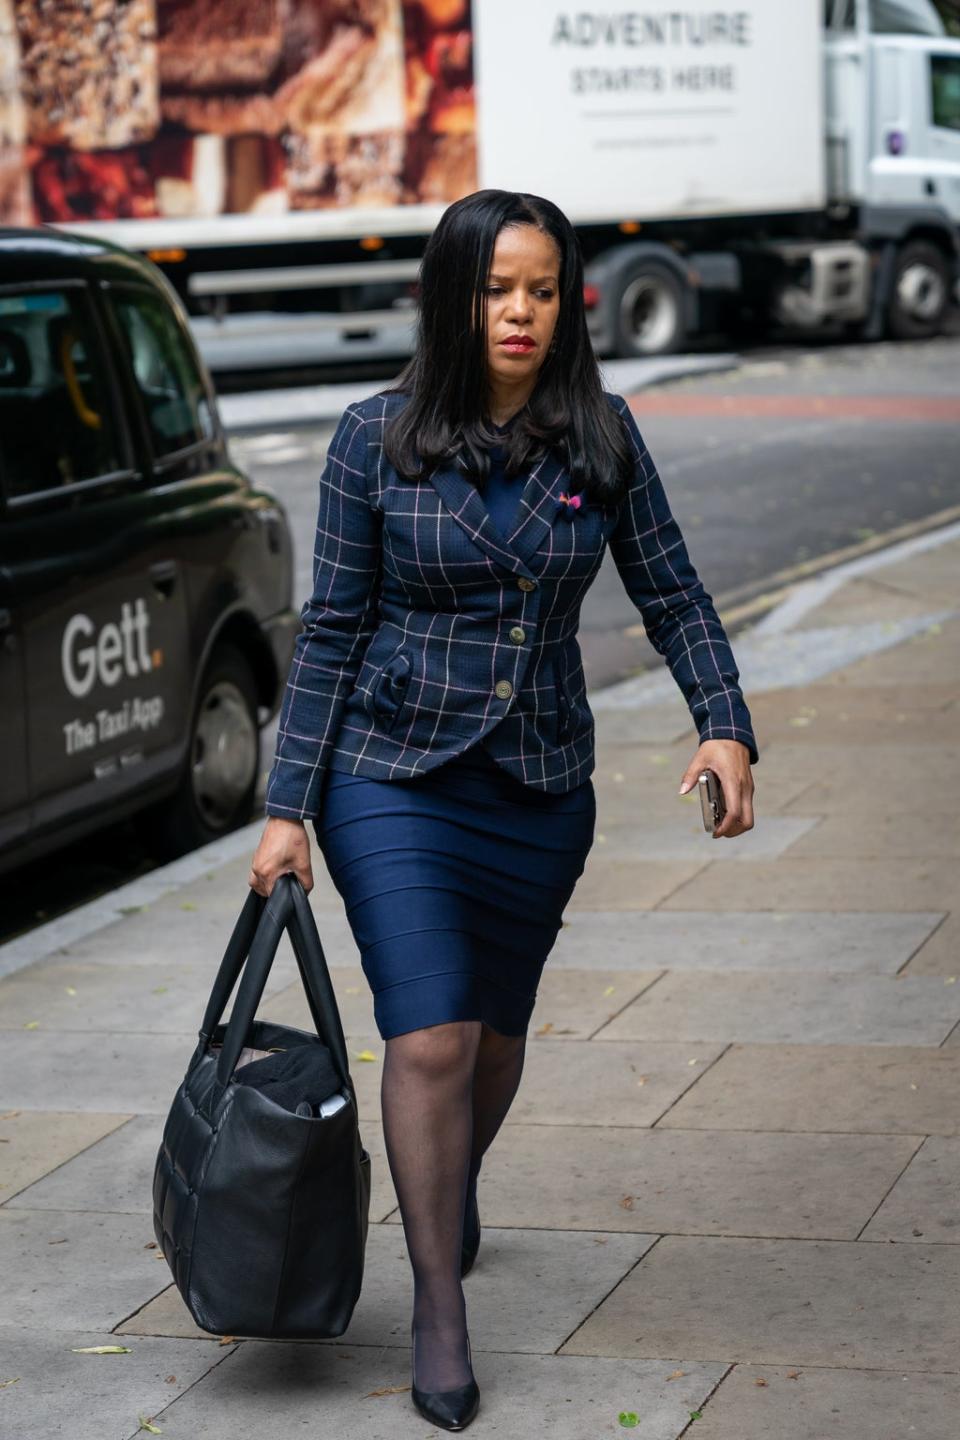 MP Claudia Webbe arrives at Southwark Crown Court (Aaron Chown/PA) (PA Wire)